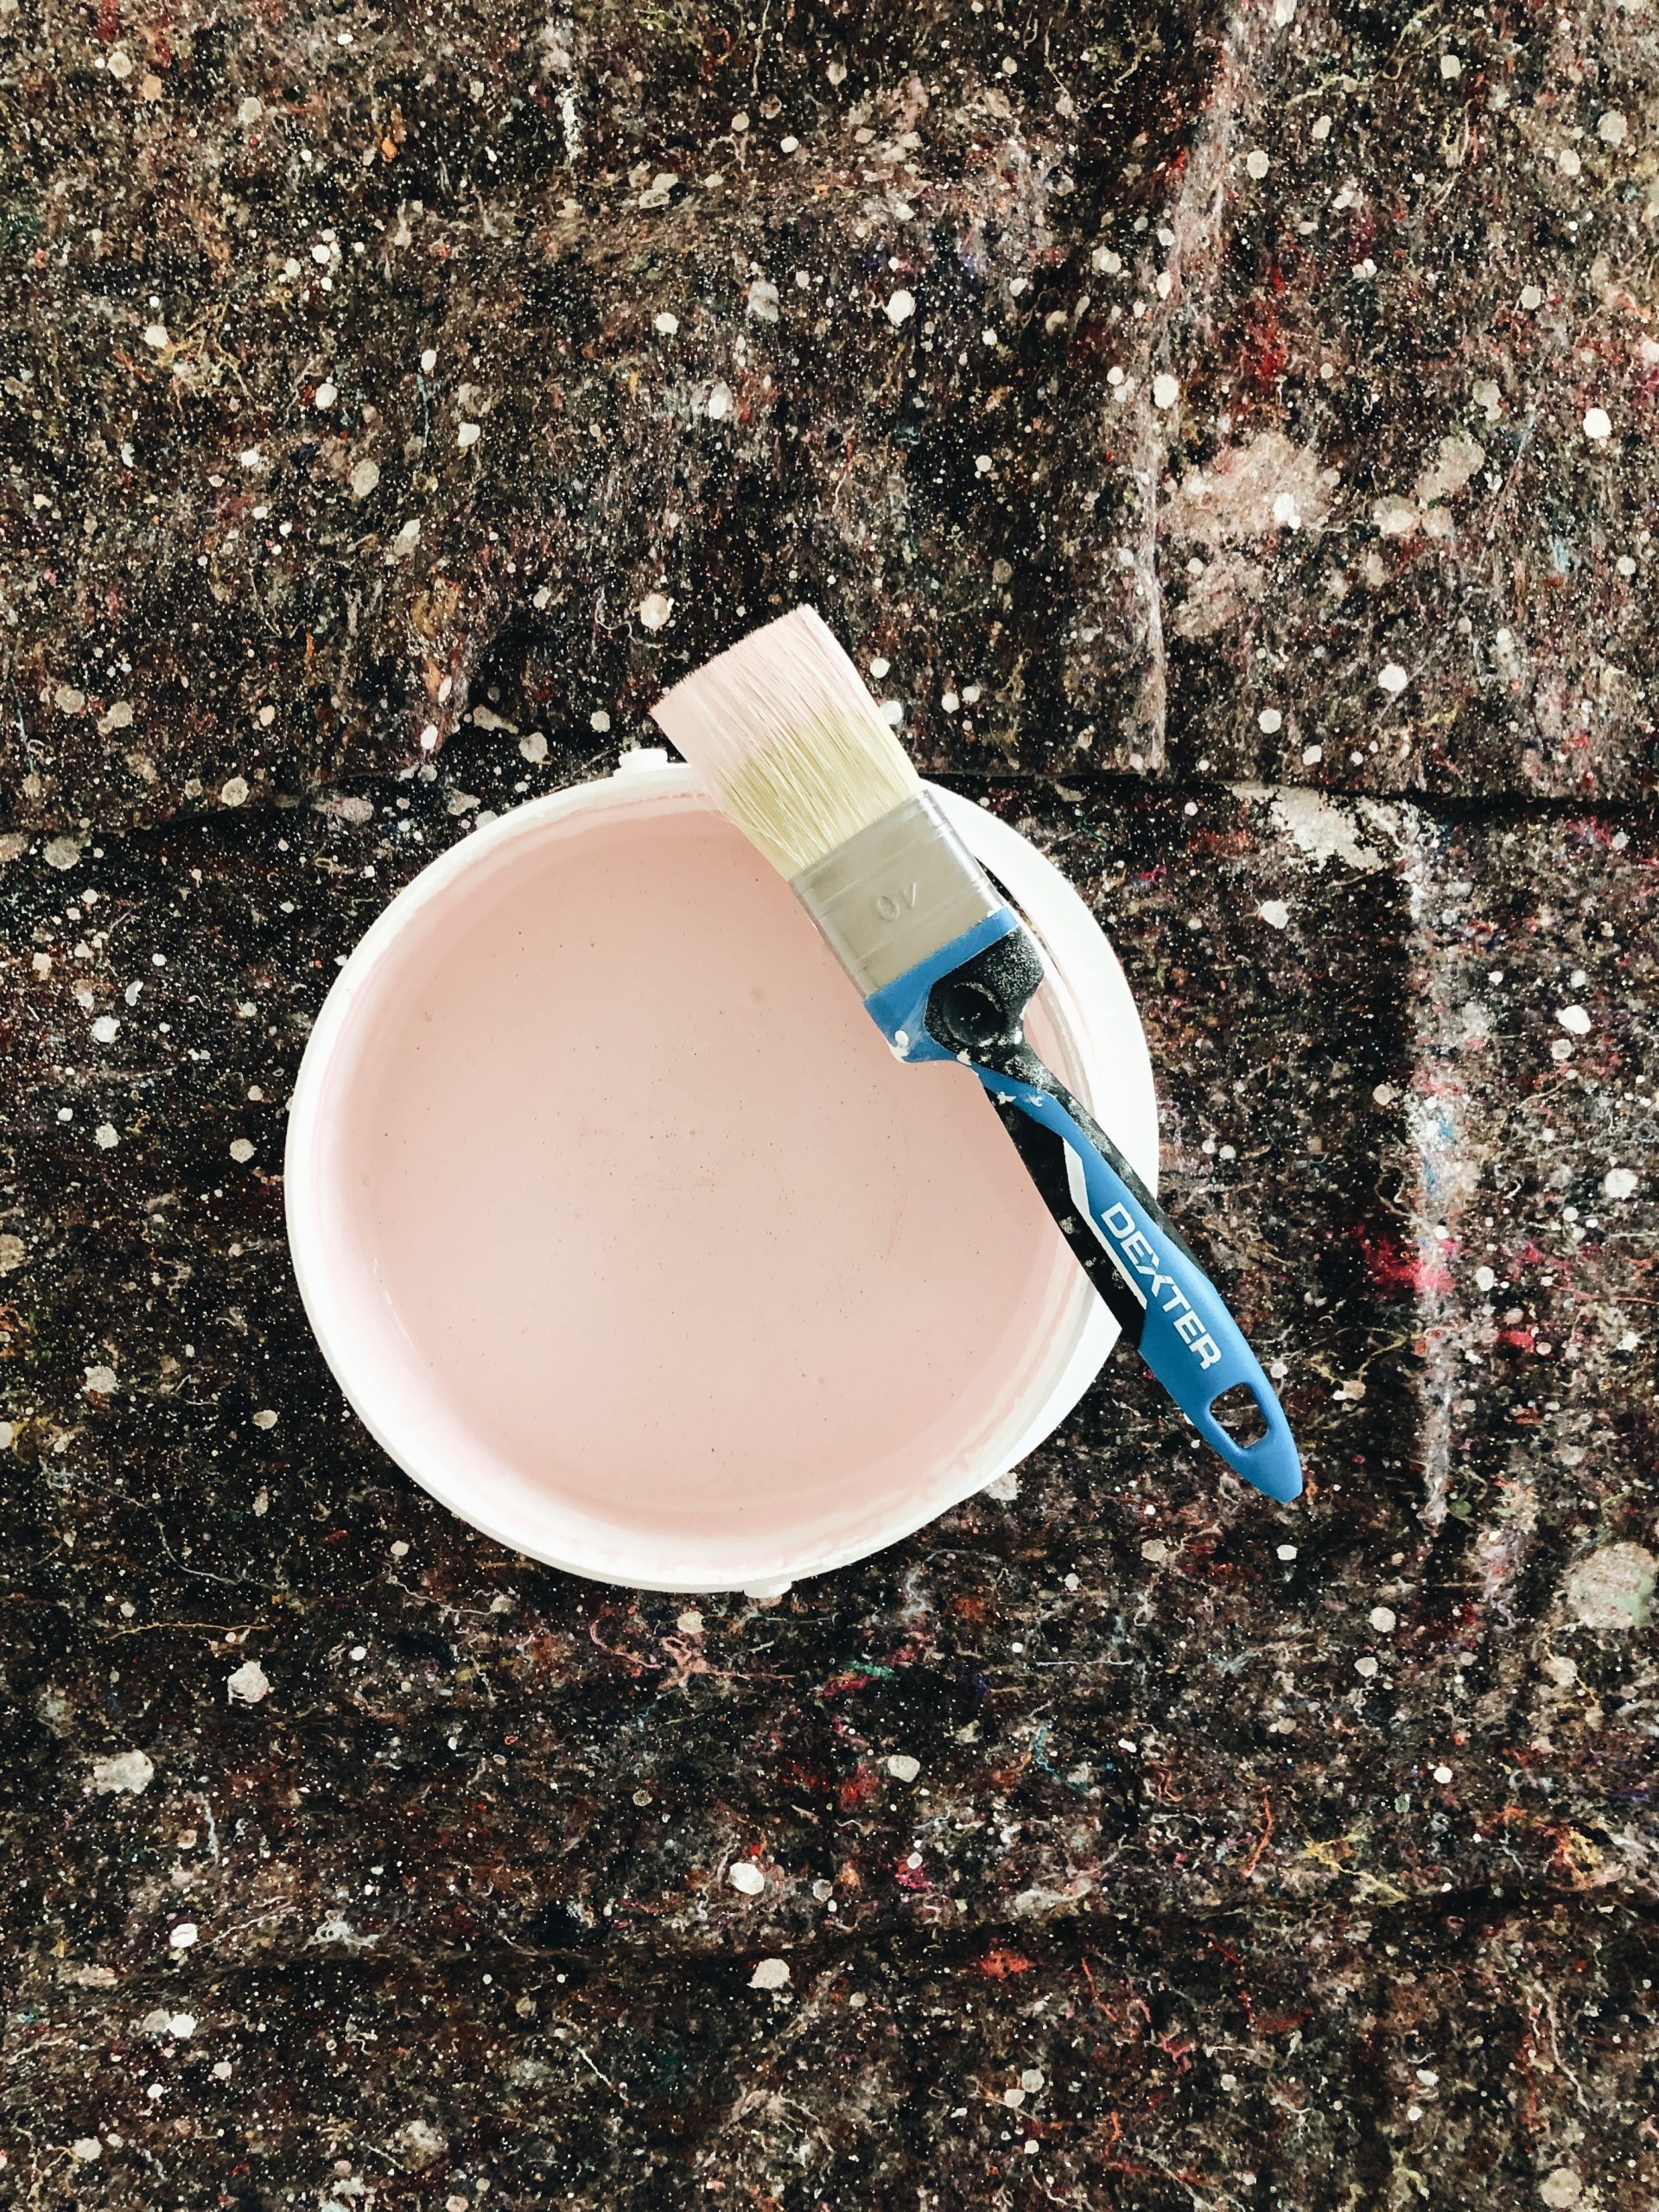 a paintbrush sitting in a white bowl on the ground